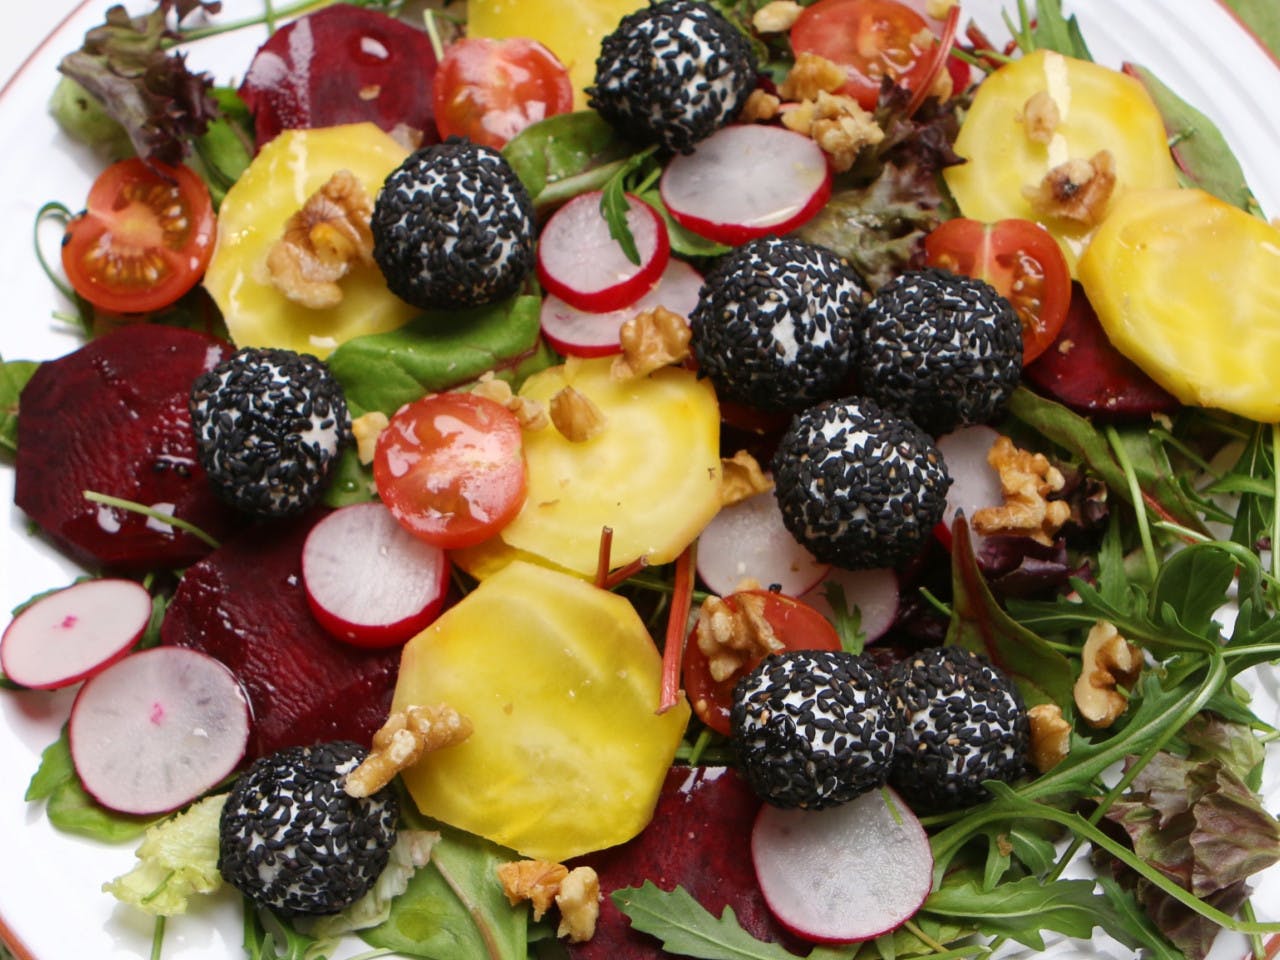 Colorful beetroot salad with goat cheese balls